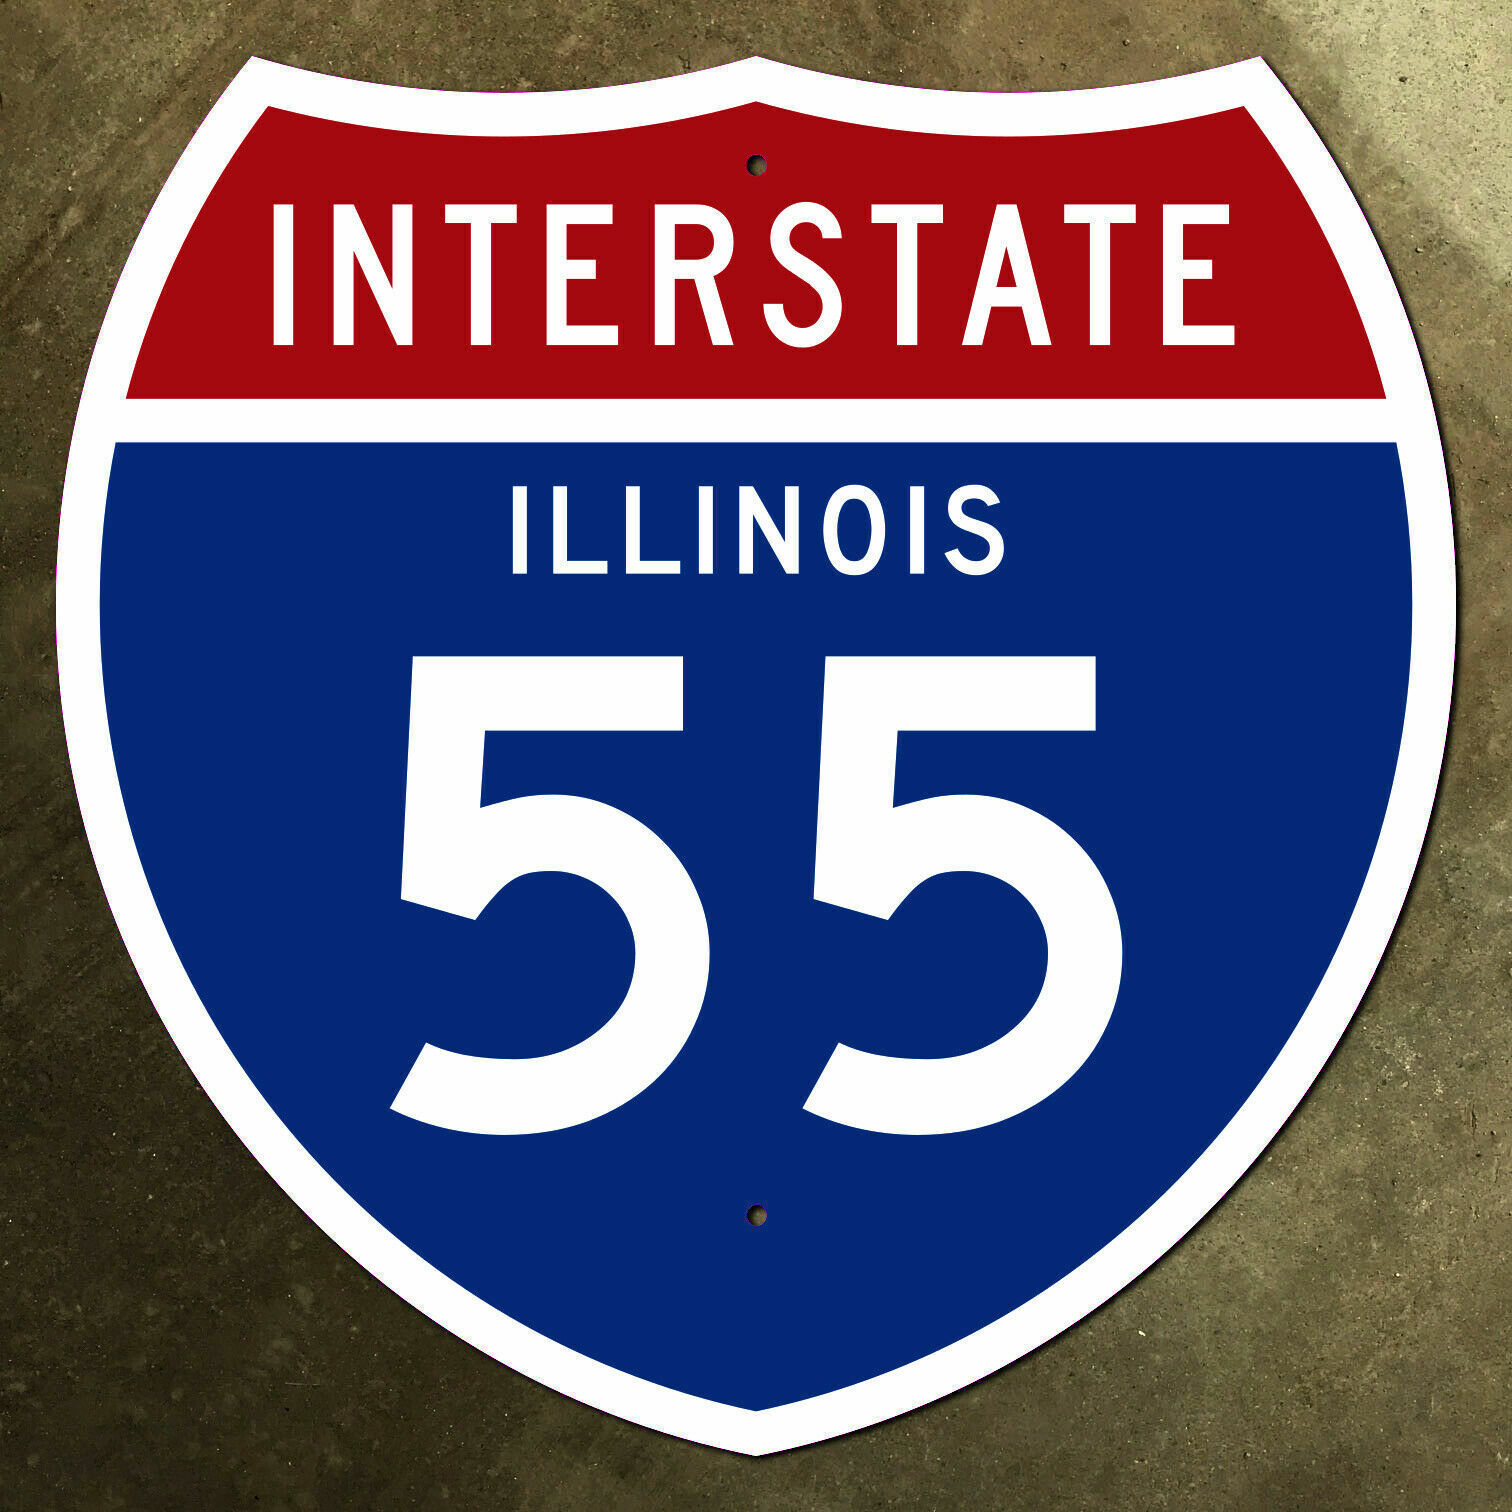 Illinois interstate route 55 highway marker road sign Chicago US 66 18x18